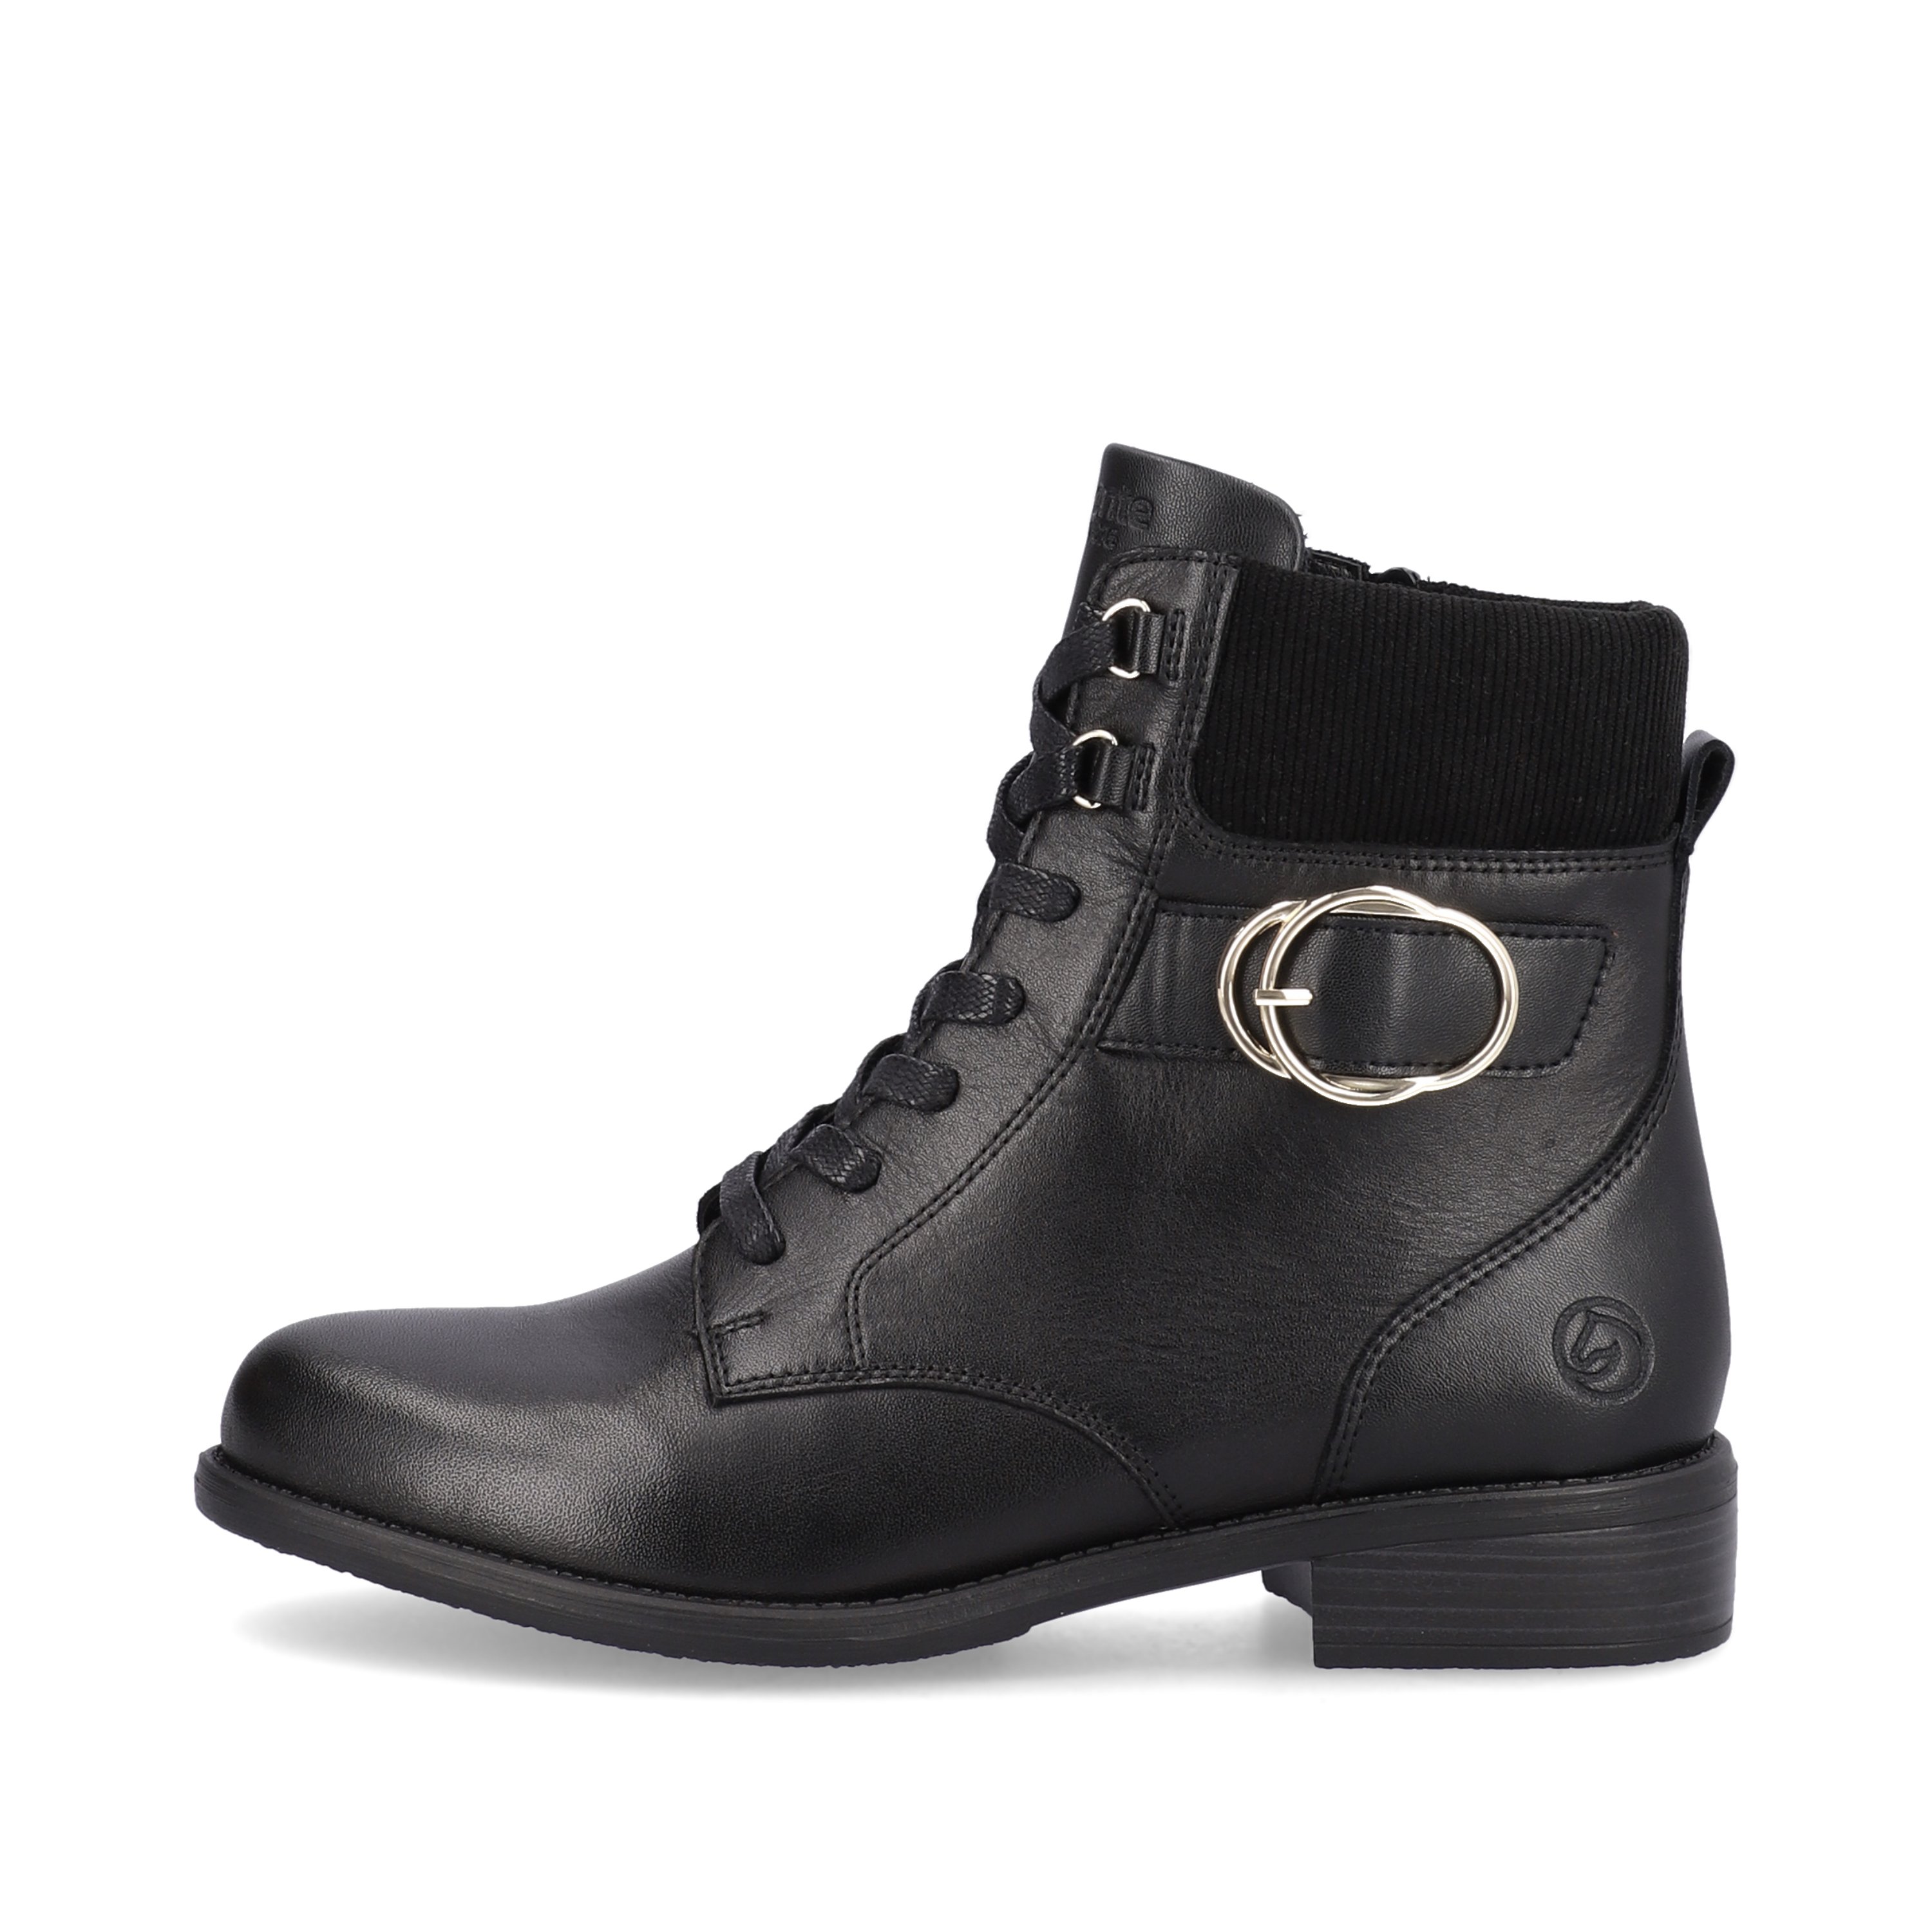 Jet black remonte women´s biker boots D0F76-01 with light sole with block heel. The outside of the shoe